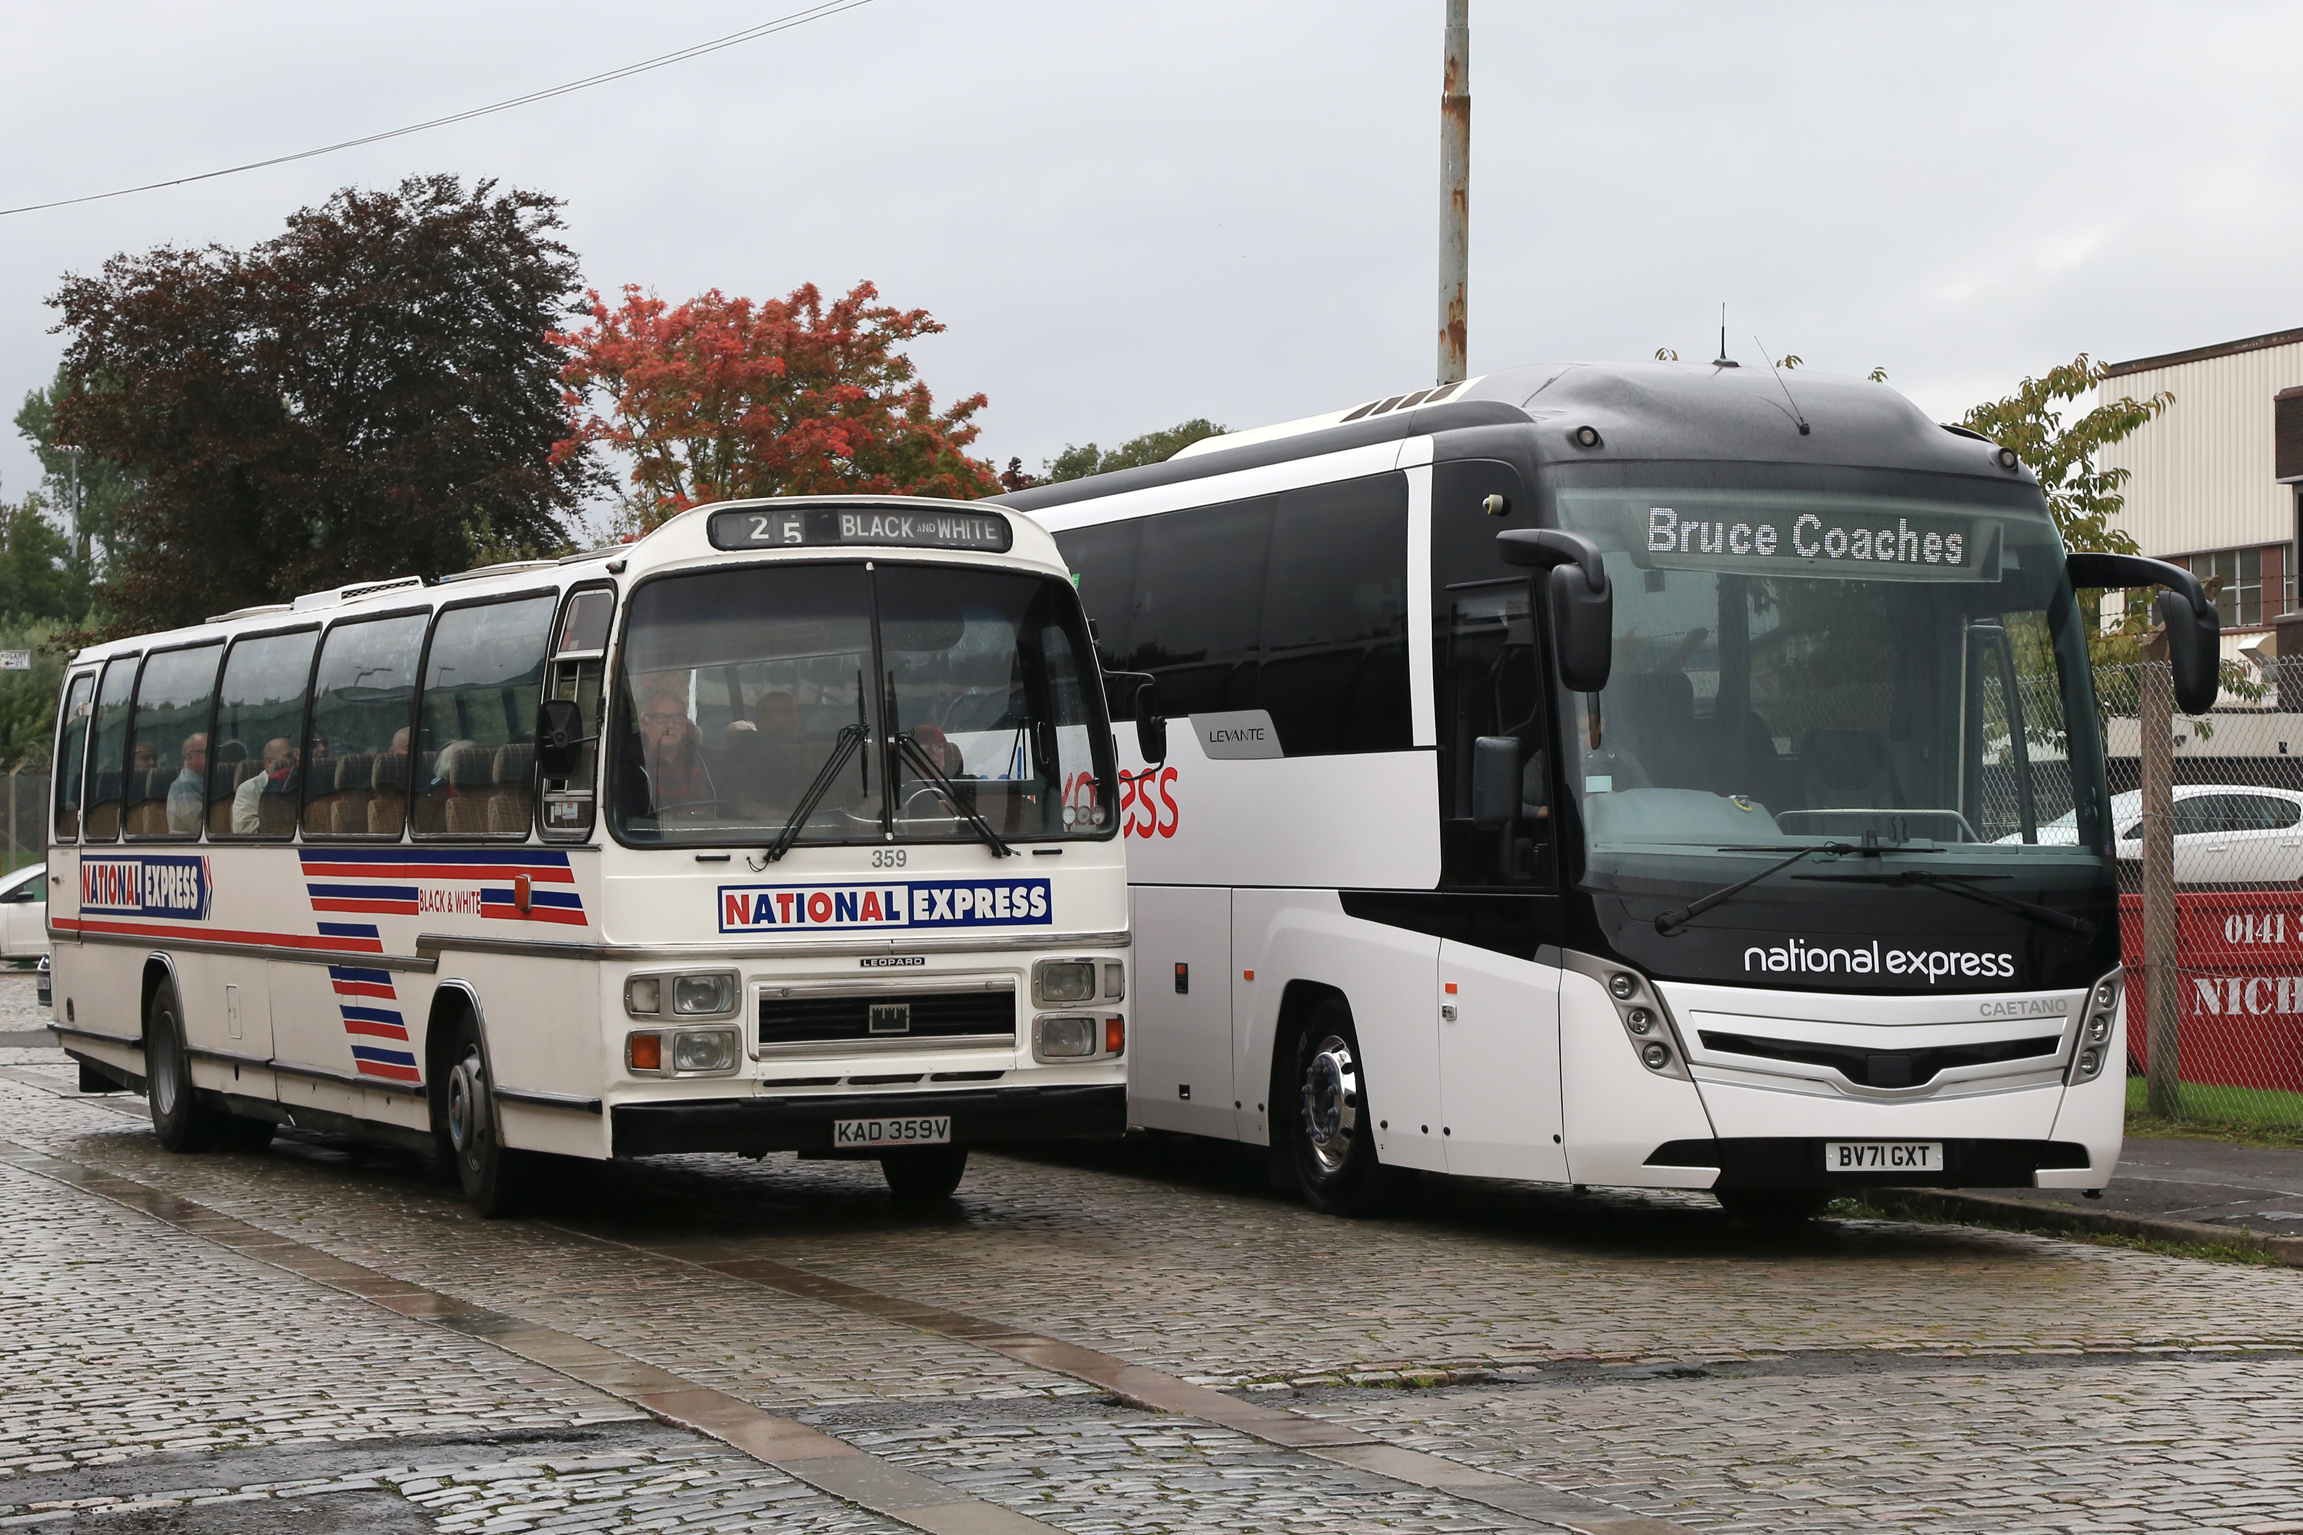 Roger Burdett’s Black and White Leyland Leopard brought a visiting party from the Midlands and briefly posed alongside the current generation of National Express vehicles represented by Bruce’s Coaches recently delivered Caetano Levante 3 bodied Scania